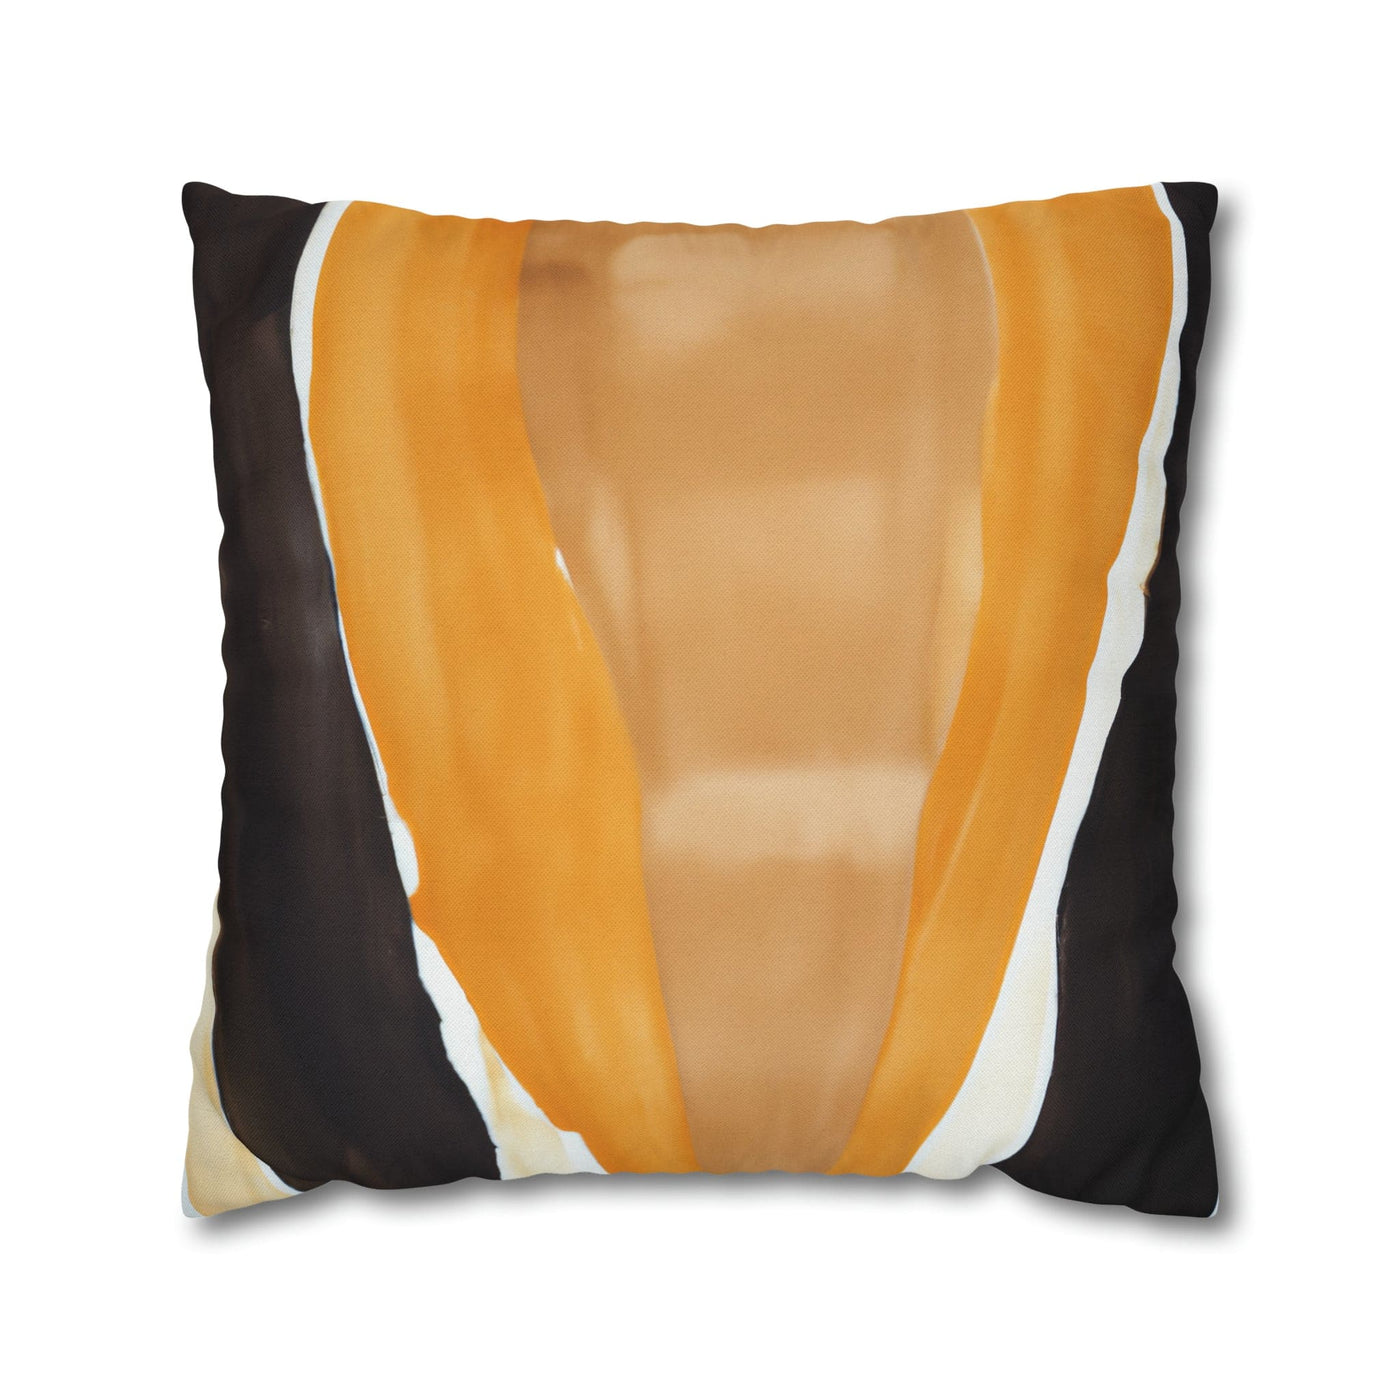 Decorative Throw Pillow Covers With Zipper - Set Of 2 Golden Yellow Brown